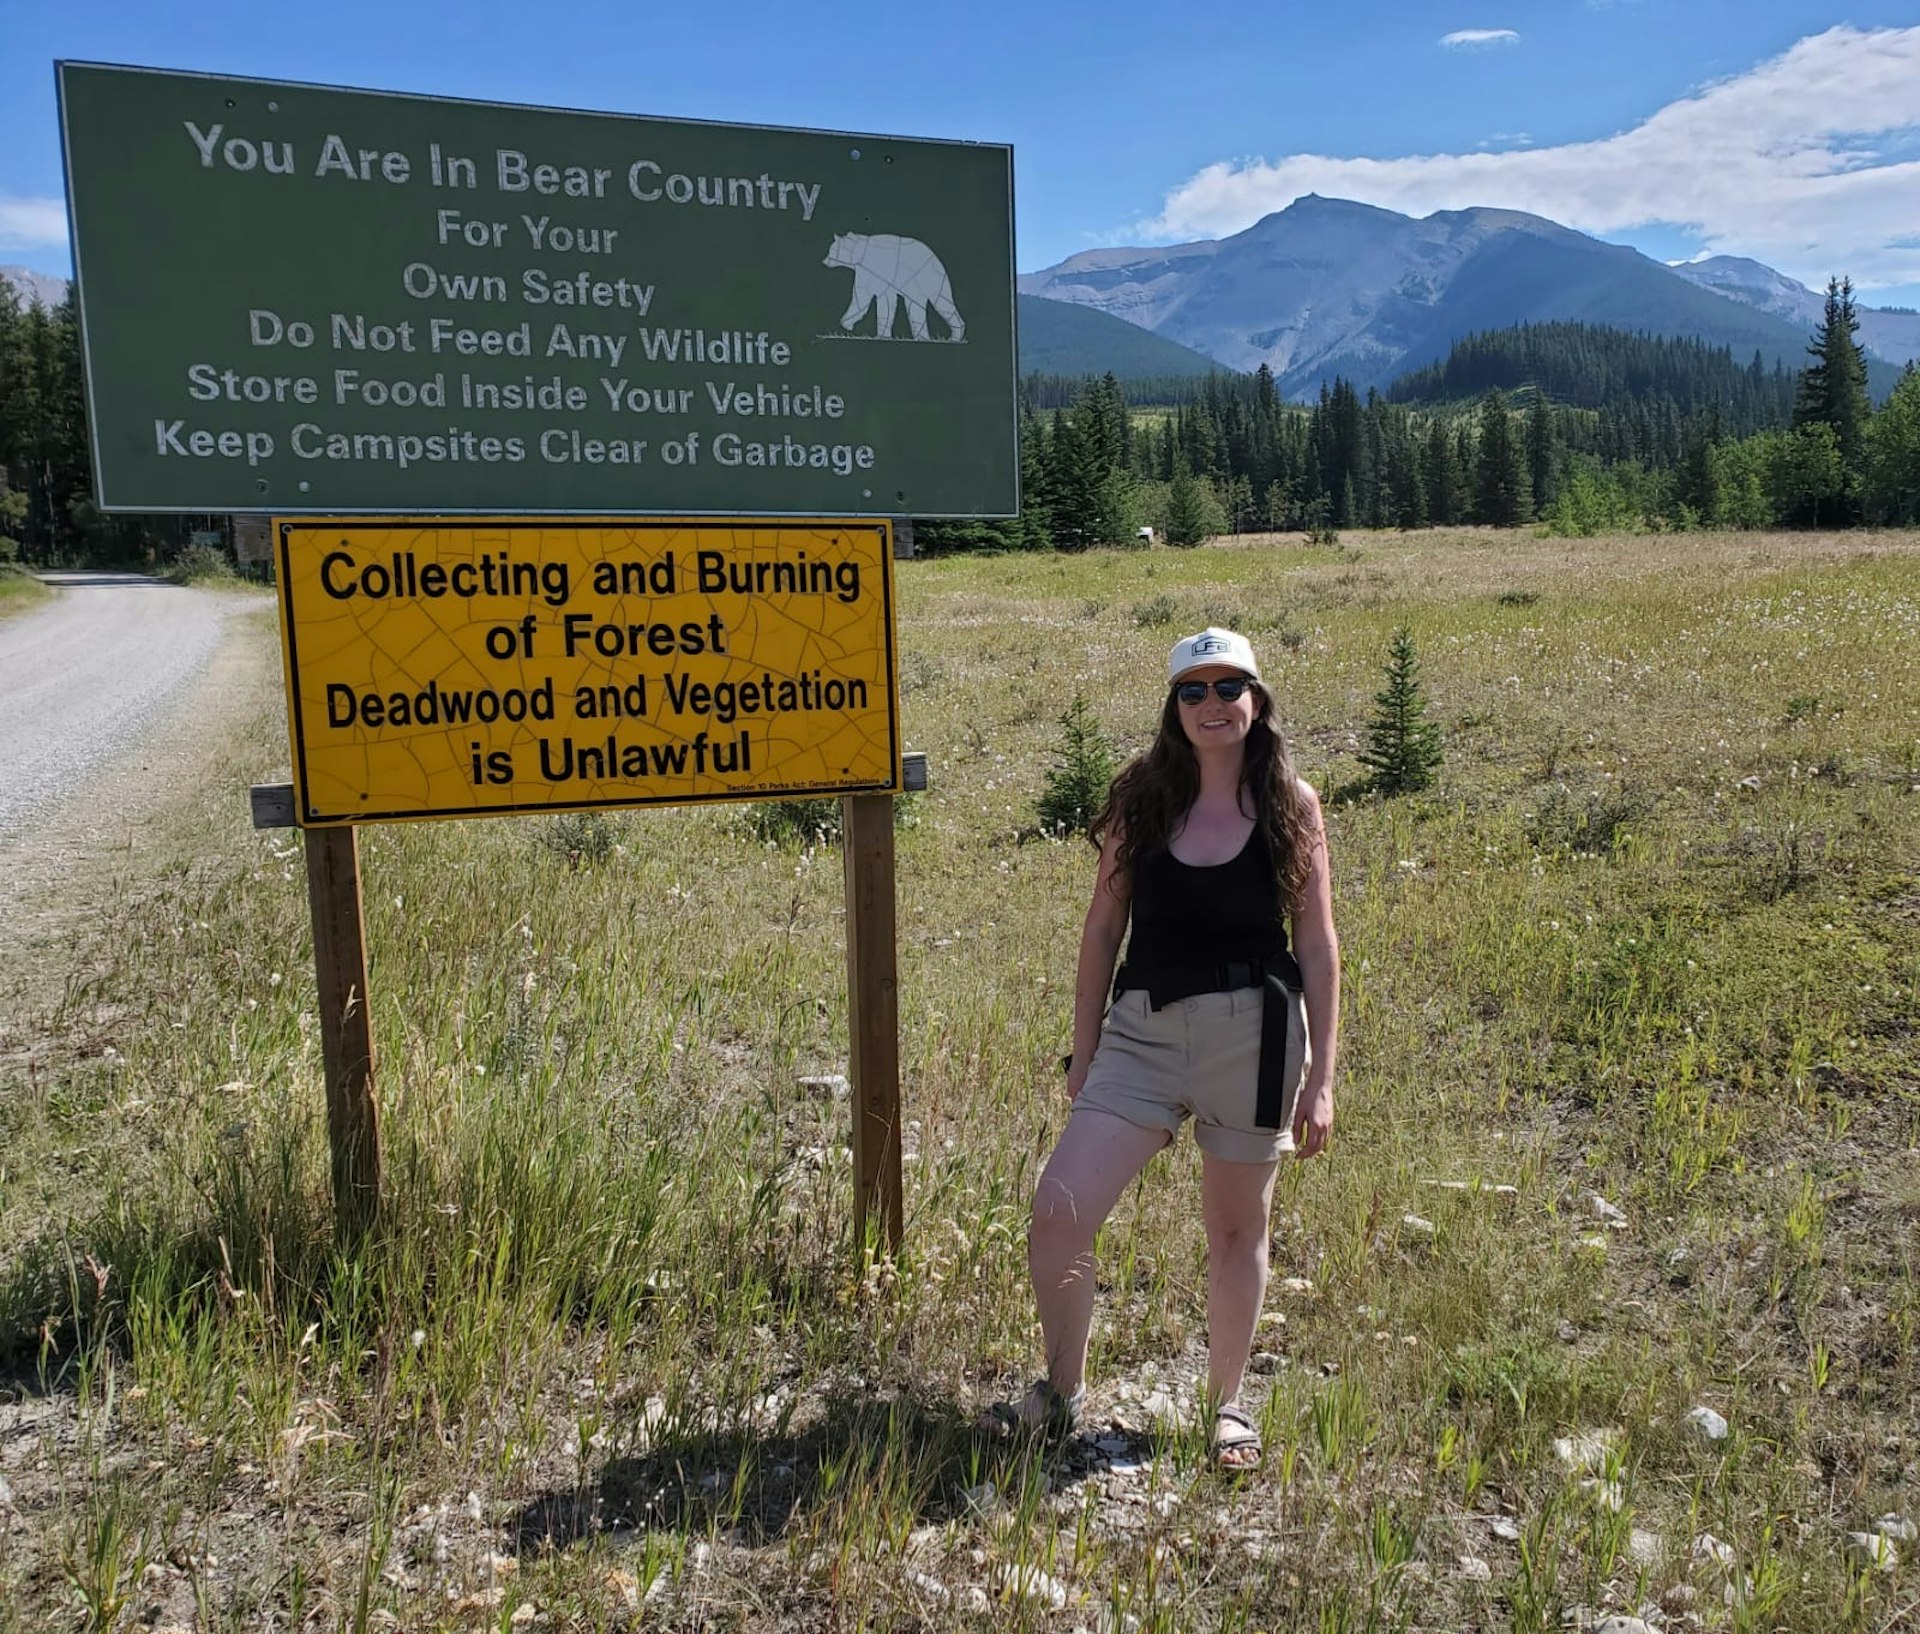 A woman stands next to a sign that says she is in Bear Country and must not feed wild animals